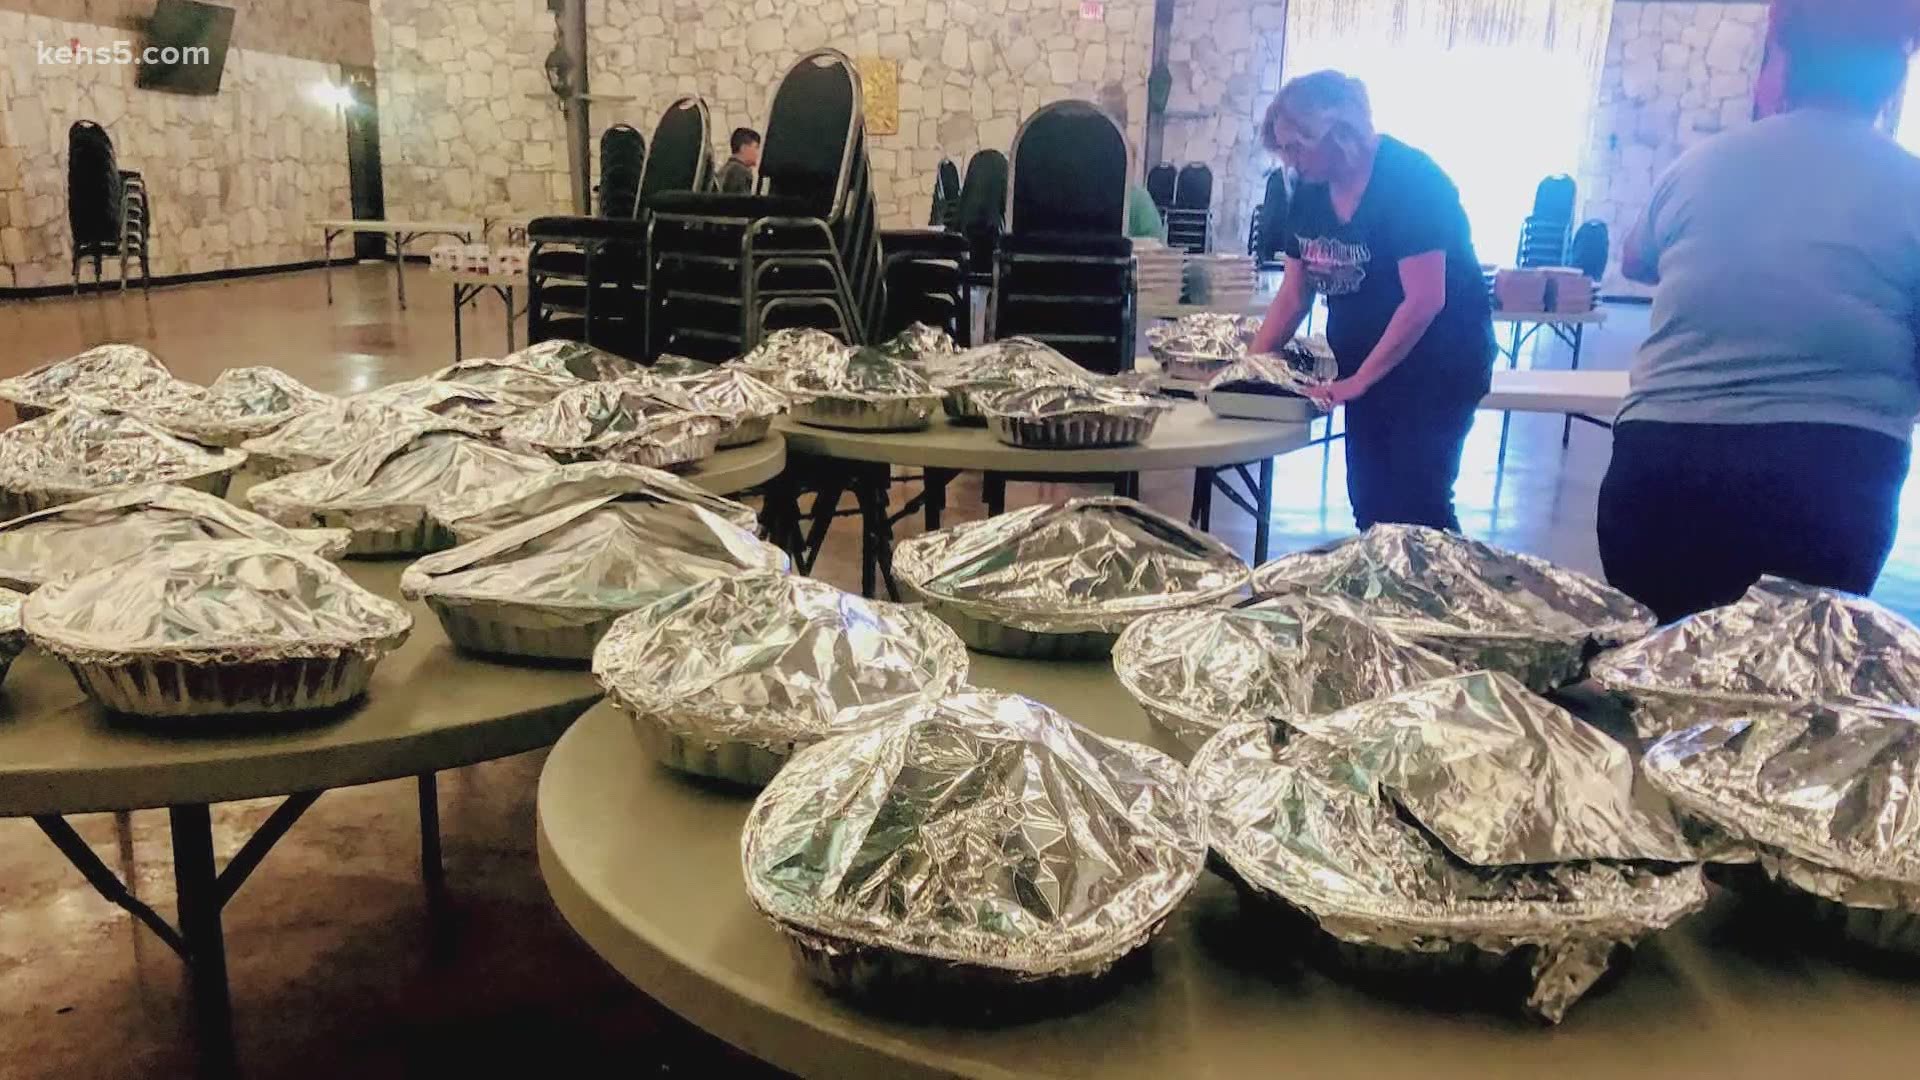 Options are slim this year for families in need. The nonprofit Moms of New Braunfels Uncensored is stepping up. They need 180 turkeys & freezer space to store them.